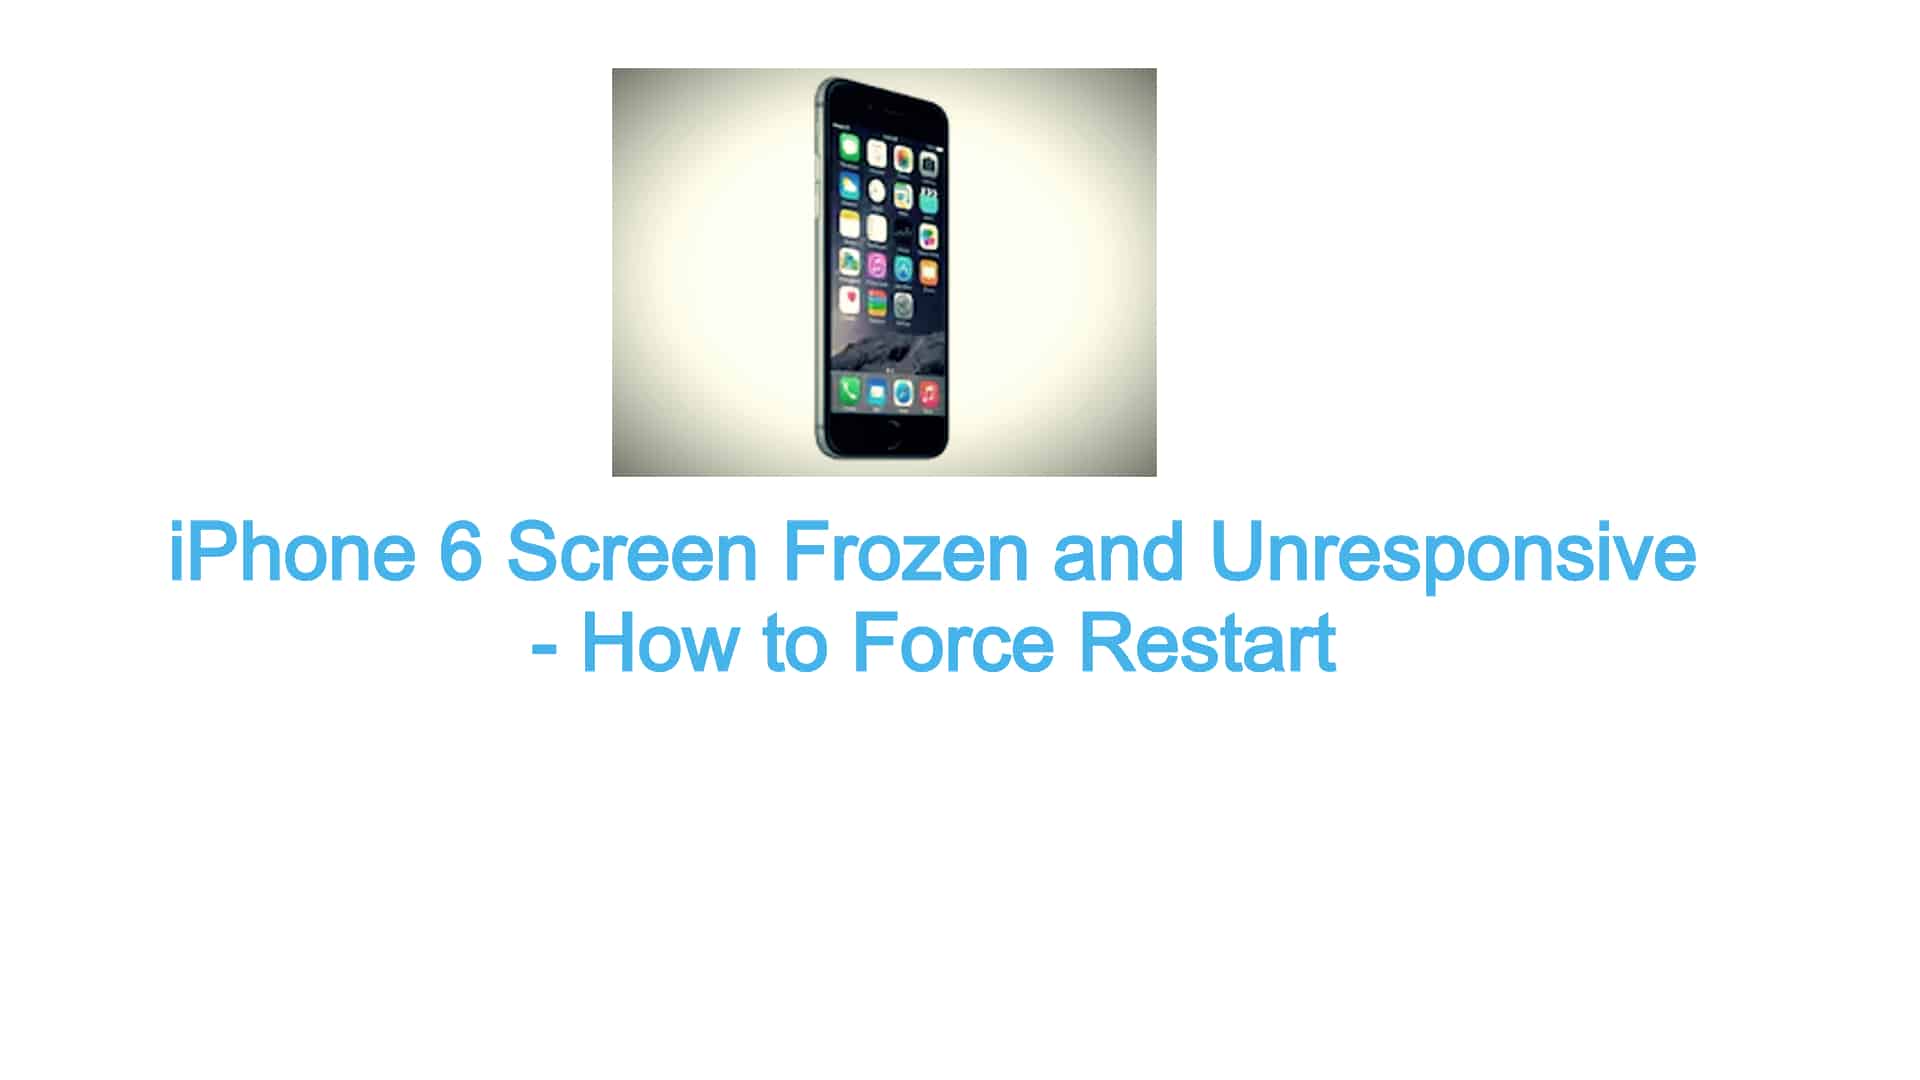 iPhone 6 Screen Frozen and Unresponsive - How to Force Restart